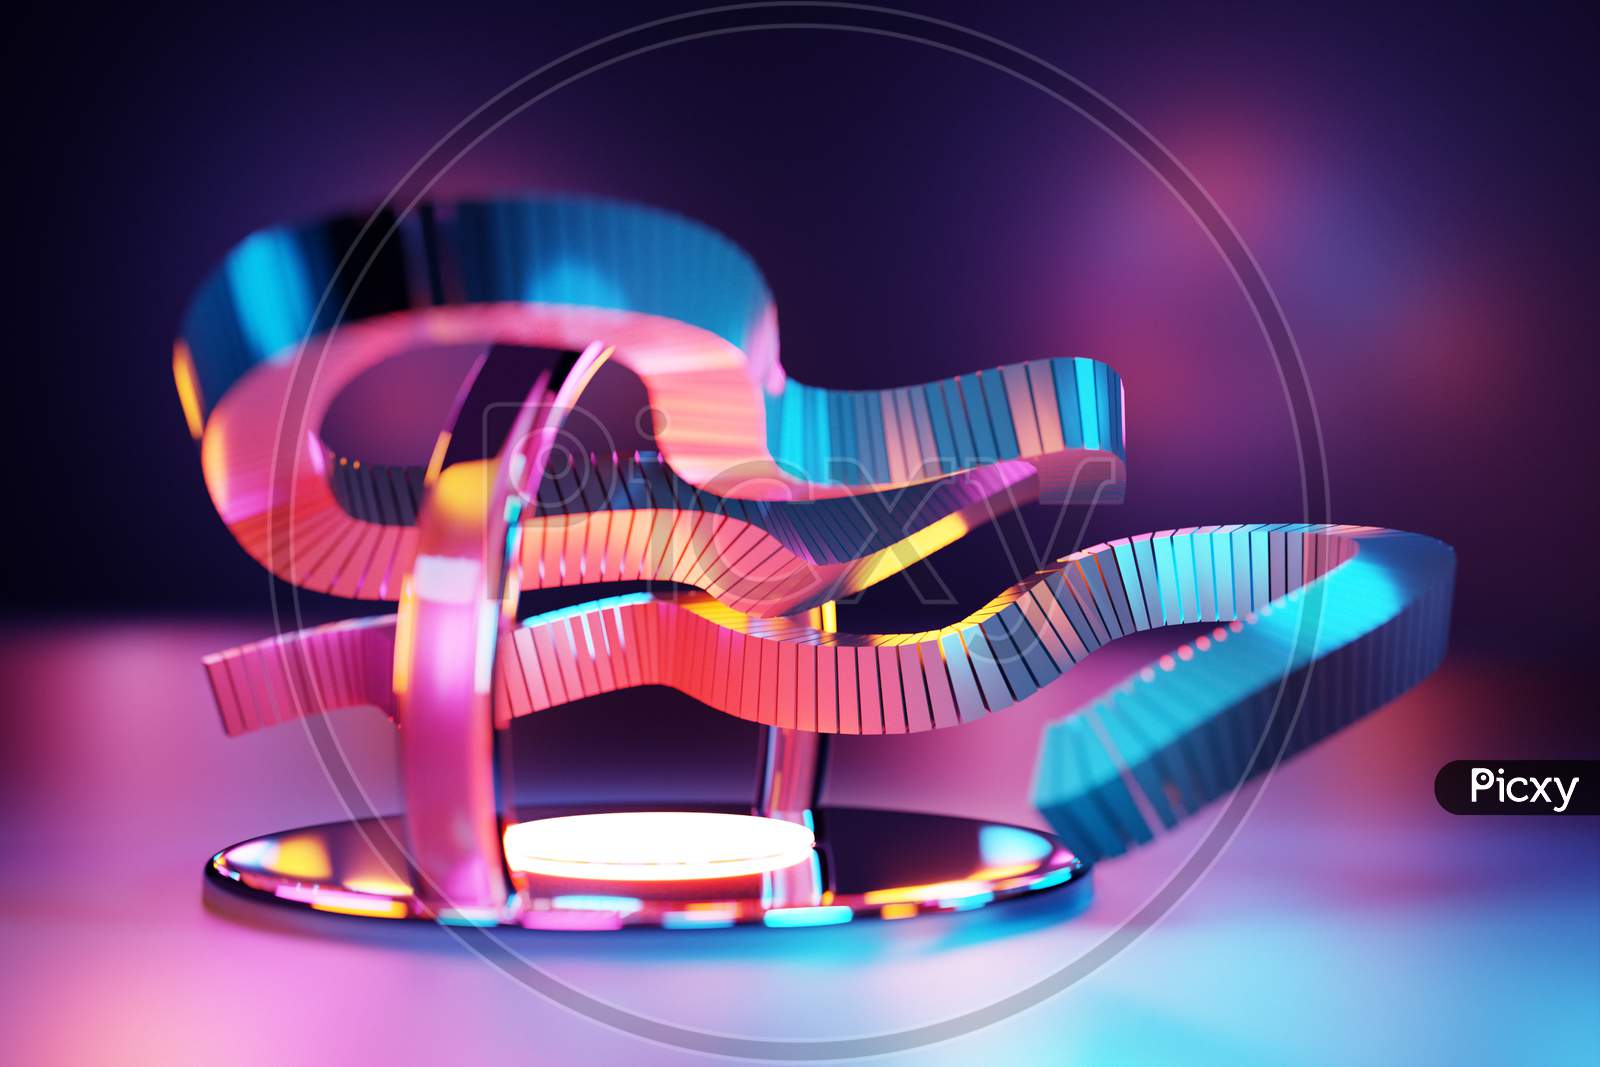 3D Illustration Of A Stereo Strip Of Different Colors. Geometric Stripes Similar To Waves. Abstract  Colorful  Glowing Crossing Lines Pattern